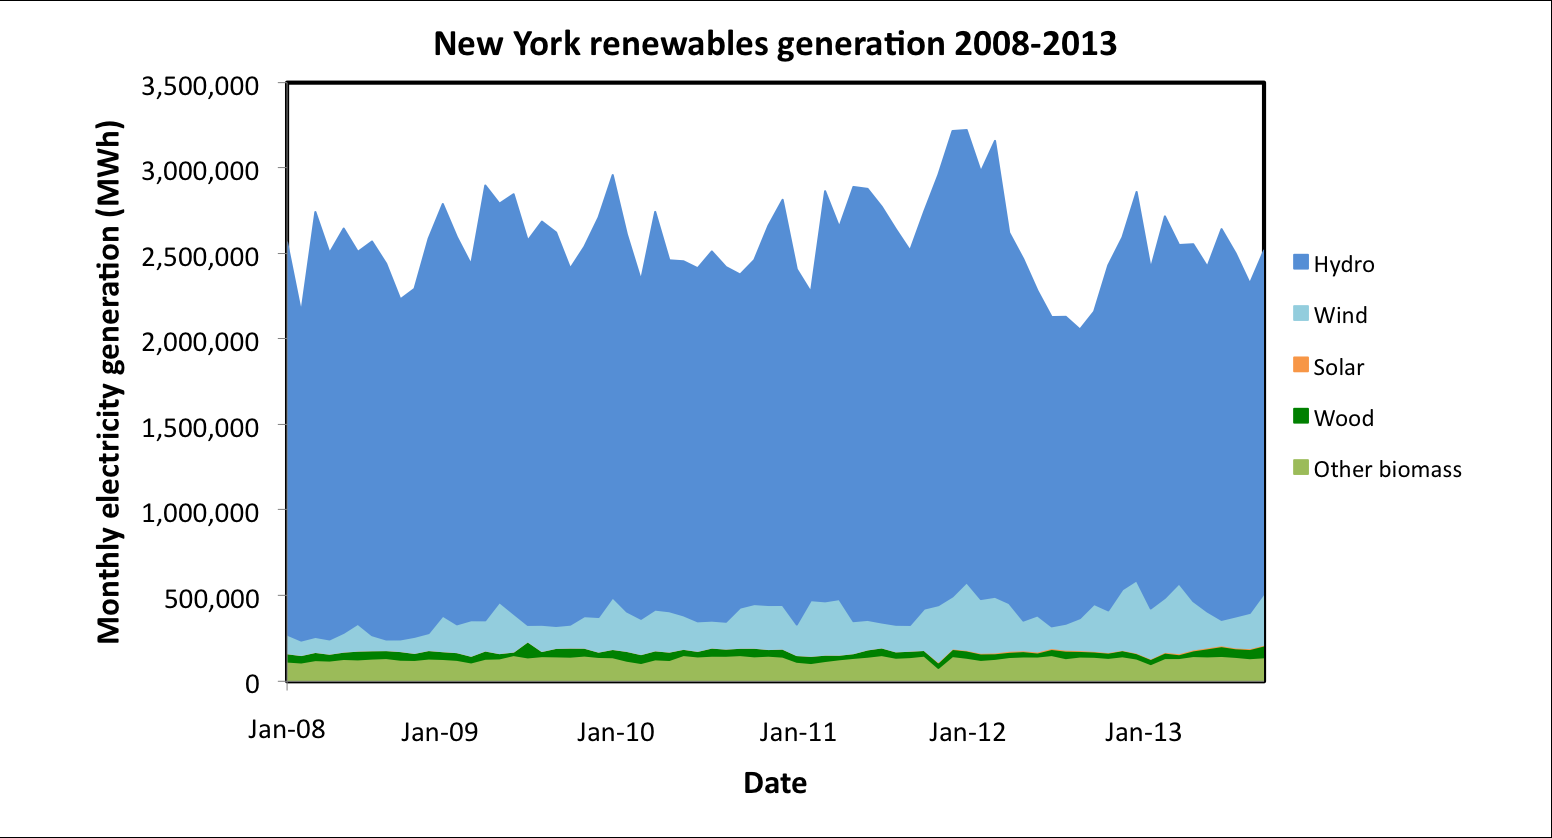 Figure 8: Electricity generation in New York by source, 2008-2013. 6 Texas Figure 9: Renewable electricity generation in New York by source, 2008-2013.